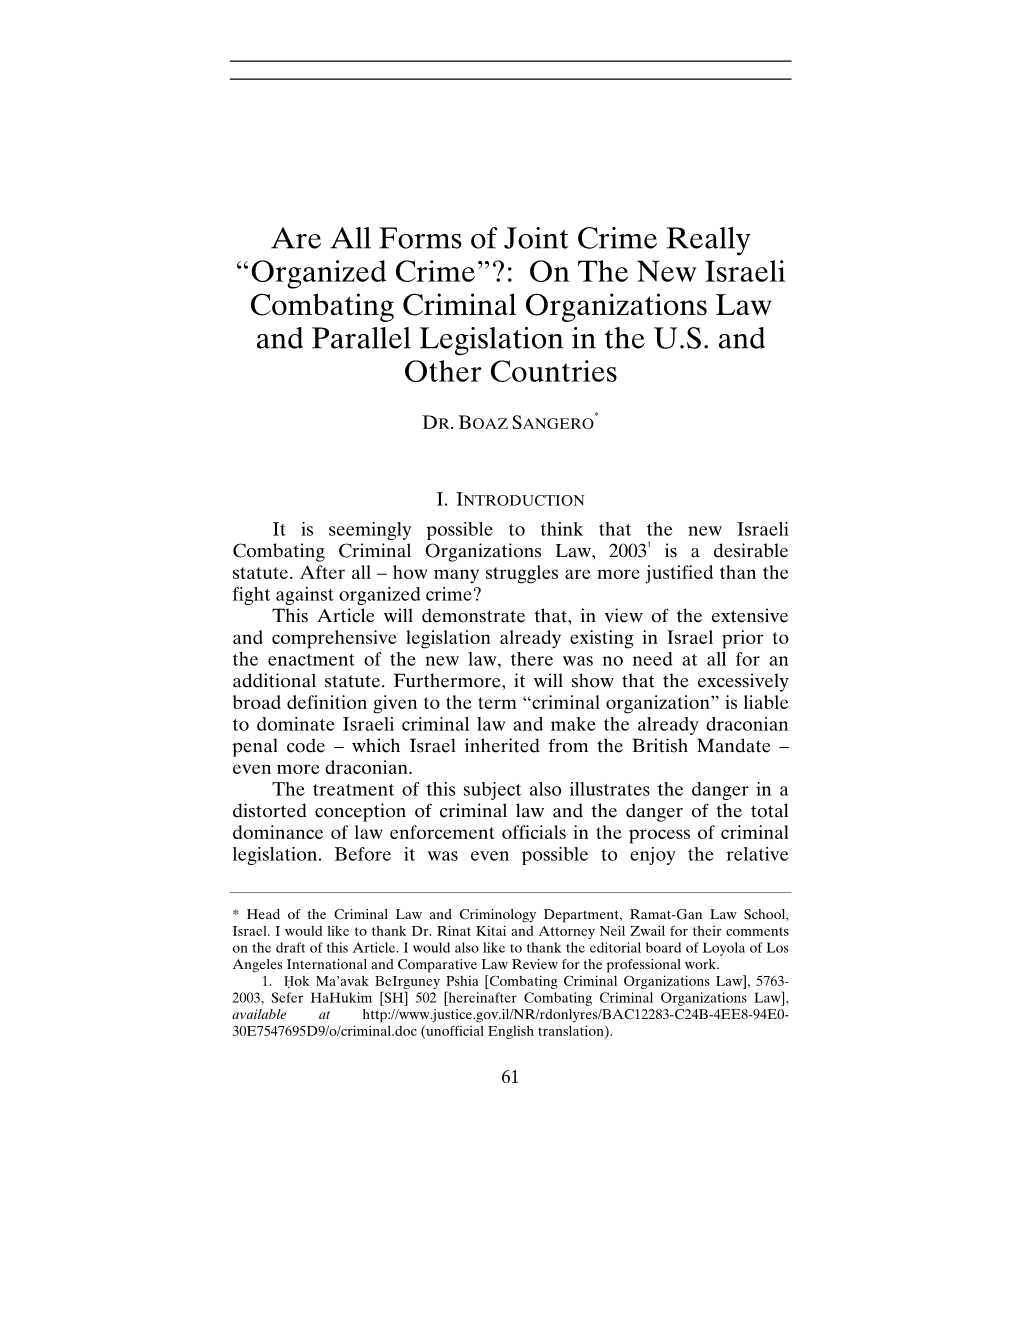 Are All Forms of Joint Crime Really “Organized Crime”?: on the New Israeli Combating Criminal Organizations Law and Parallel Legislation in the U.S